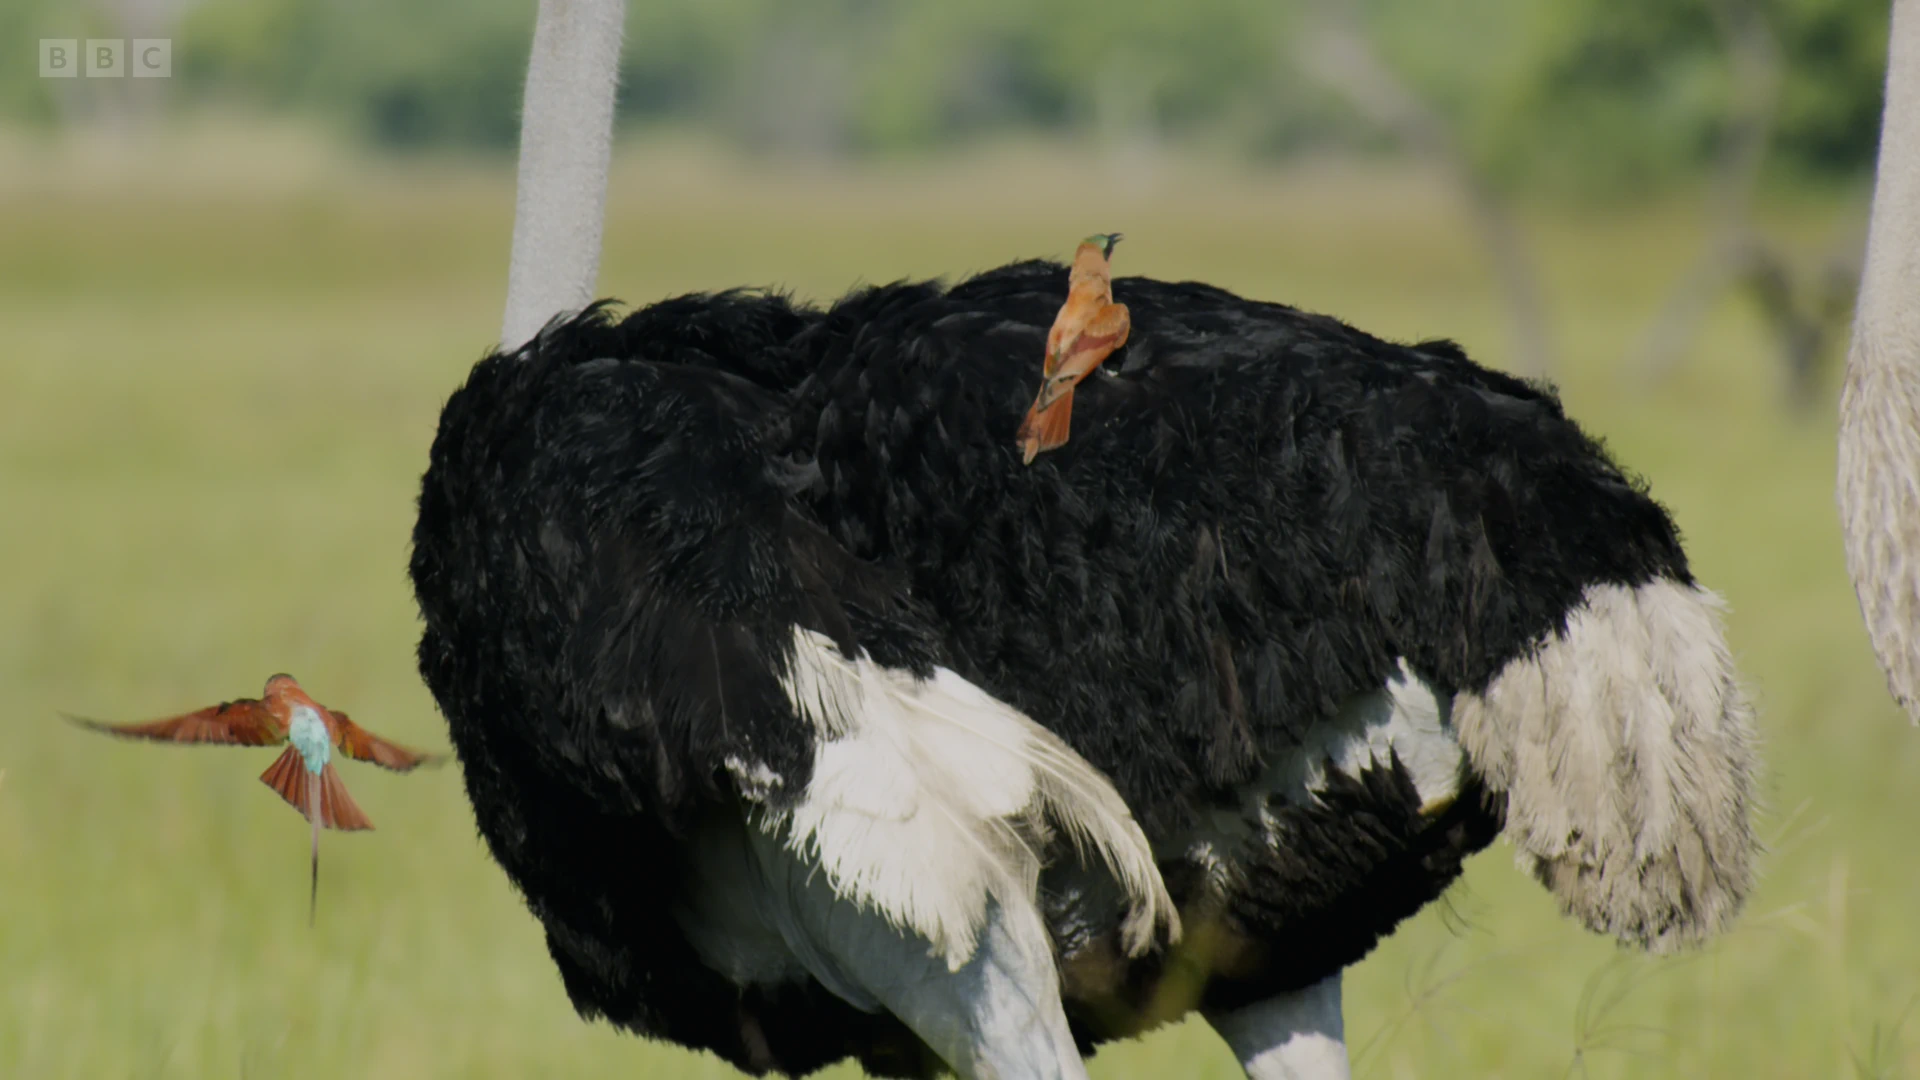 South African ostrich (Struthio camelus australis) as shown in Planet Earth II - Grasslands